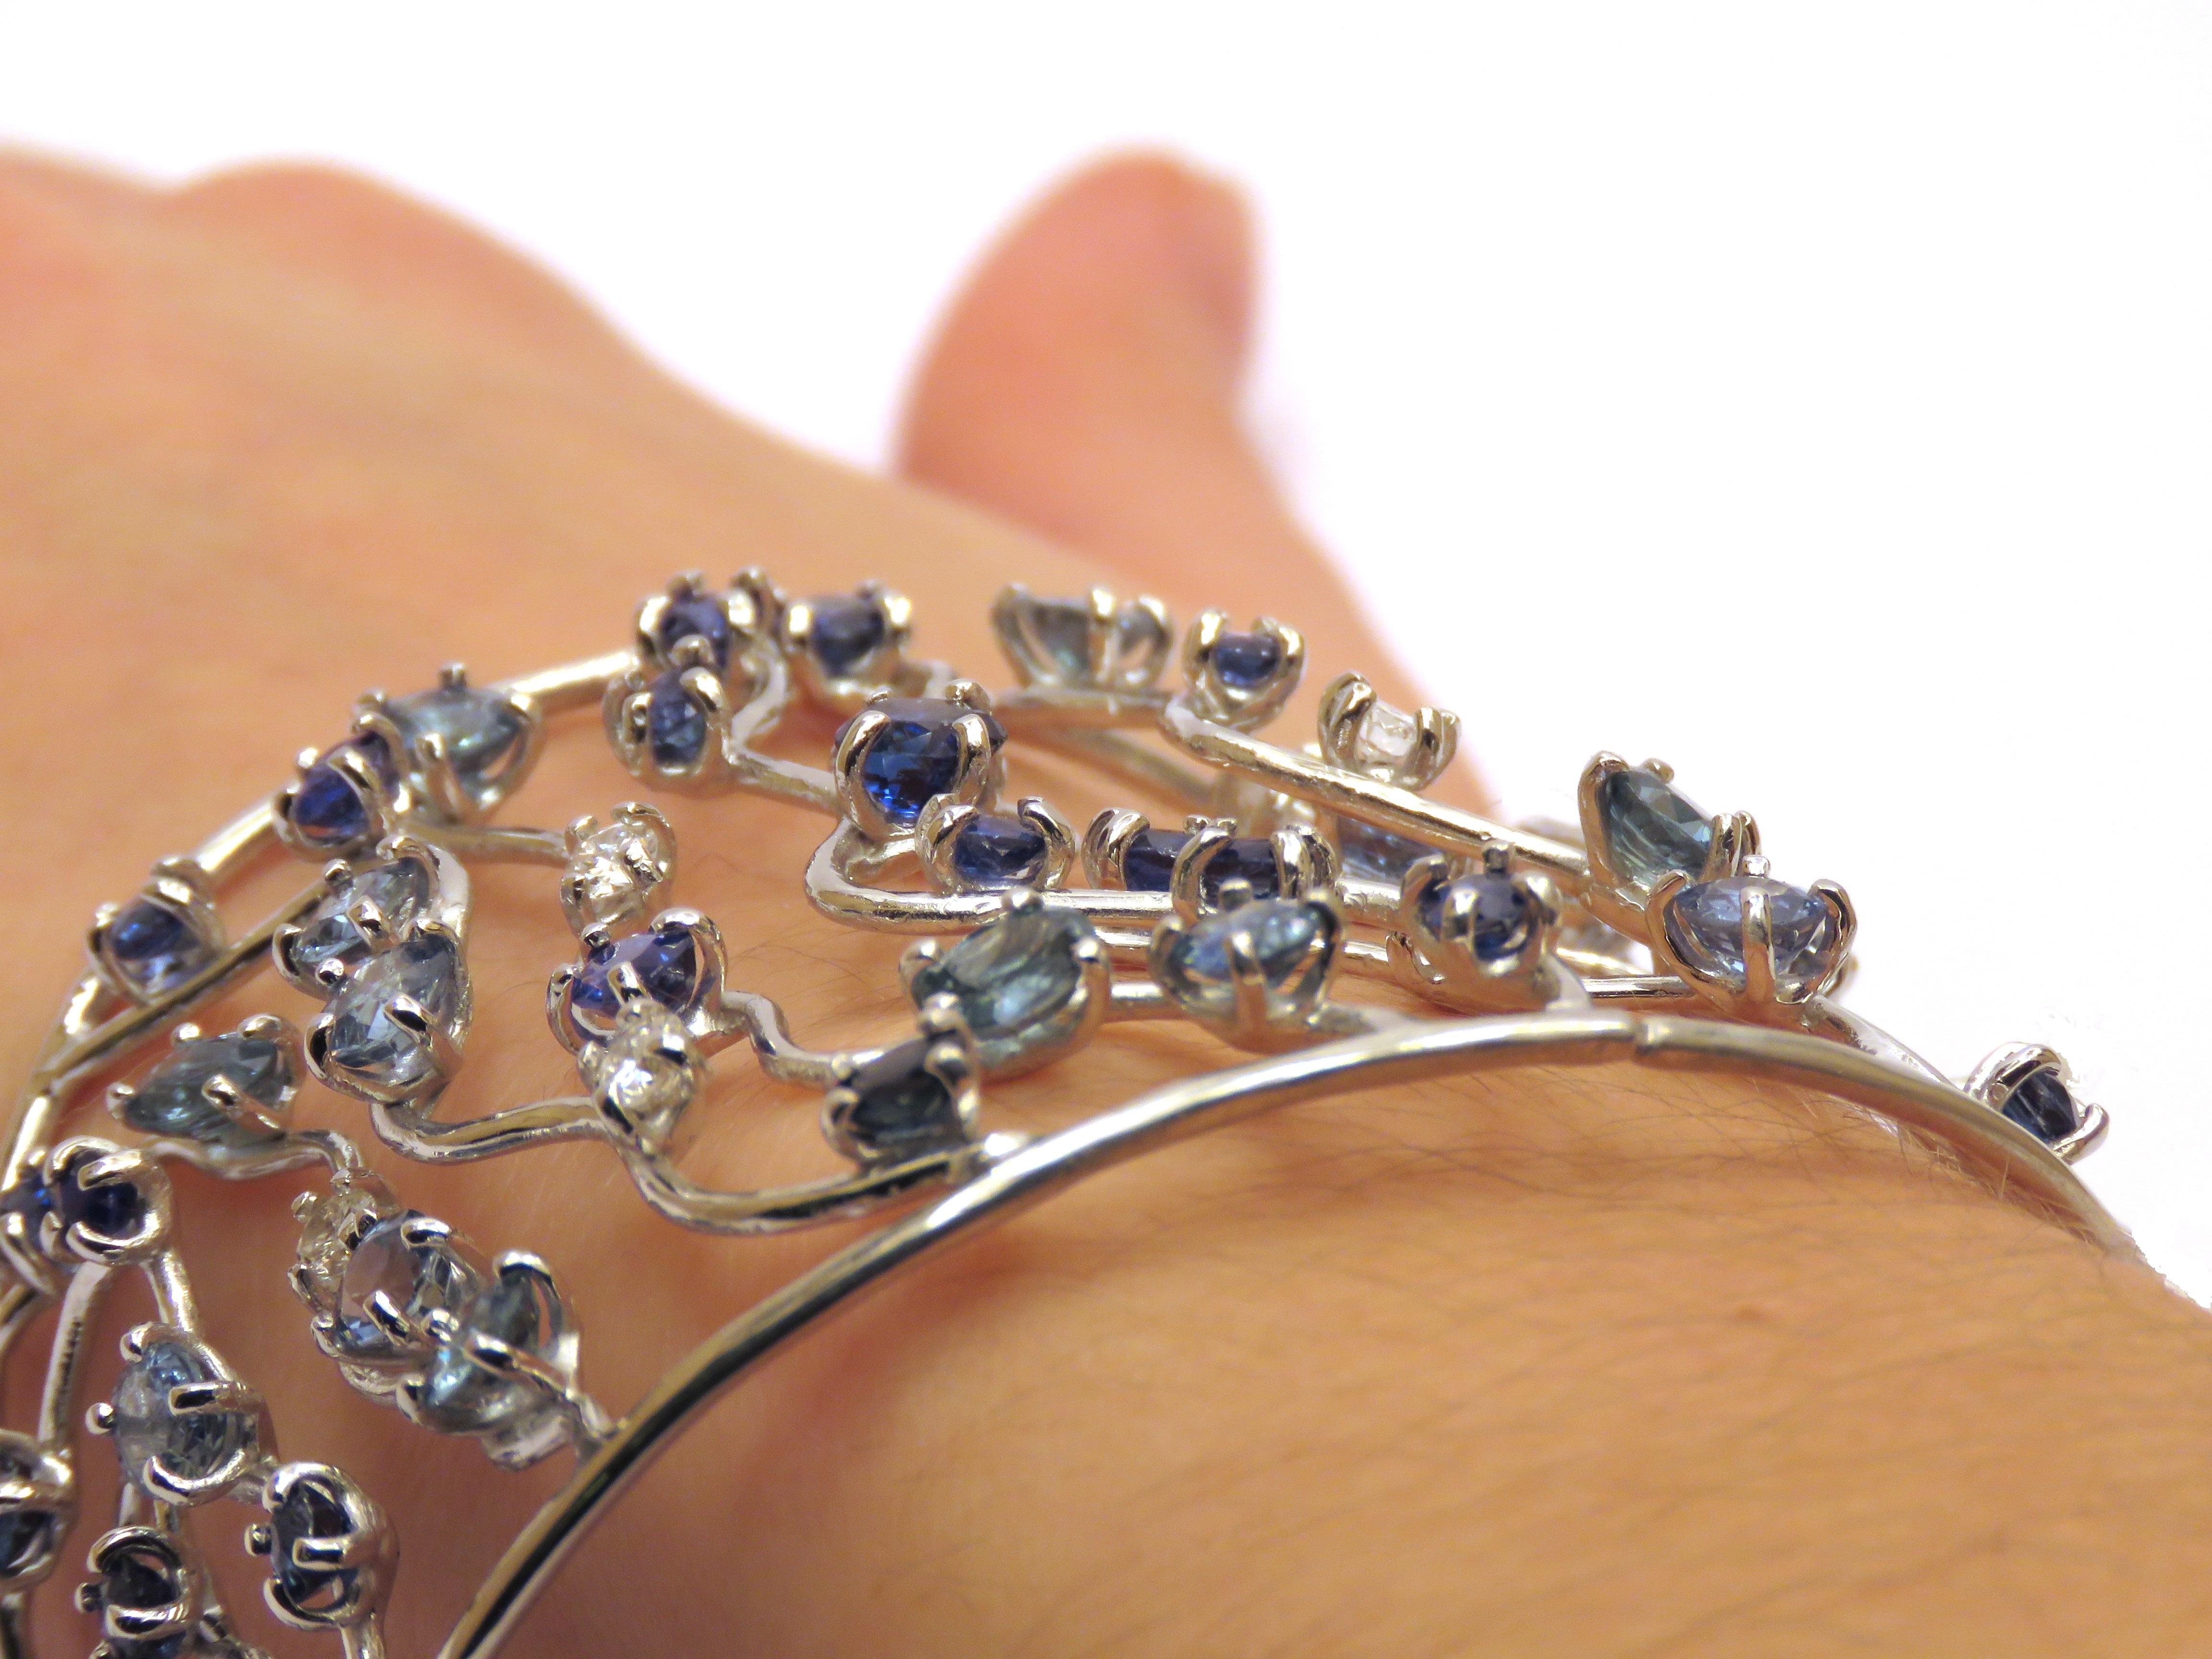 Breath-taking cuff bracelet inspired by the harmonious grace of ocean waves handcrafted in 18 karat white gold. Depicting waves throughout each of the stems, the bracelet is dotted with 65 vibrant blue sapphire gemstones in multiple shades totalling